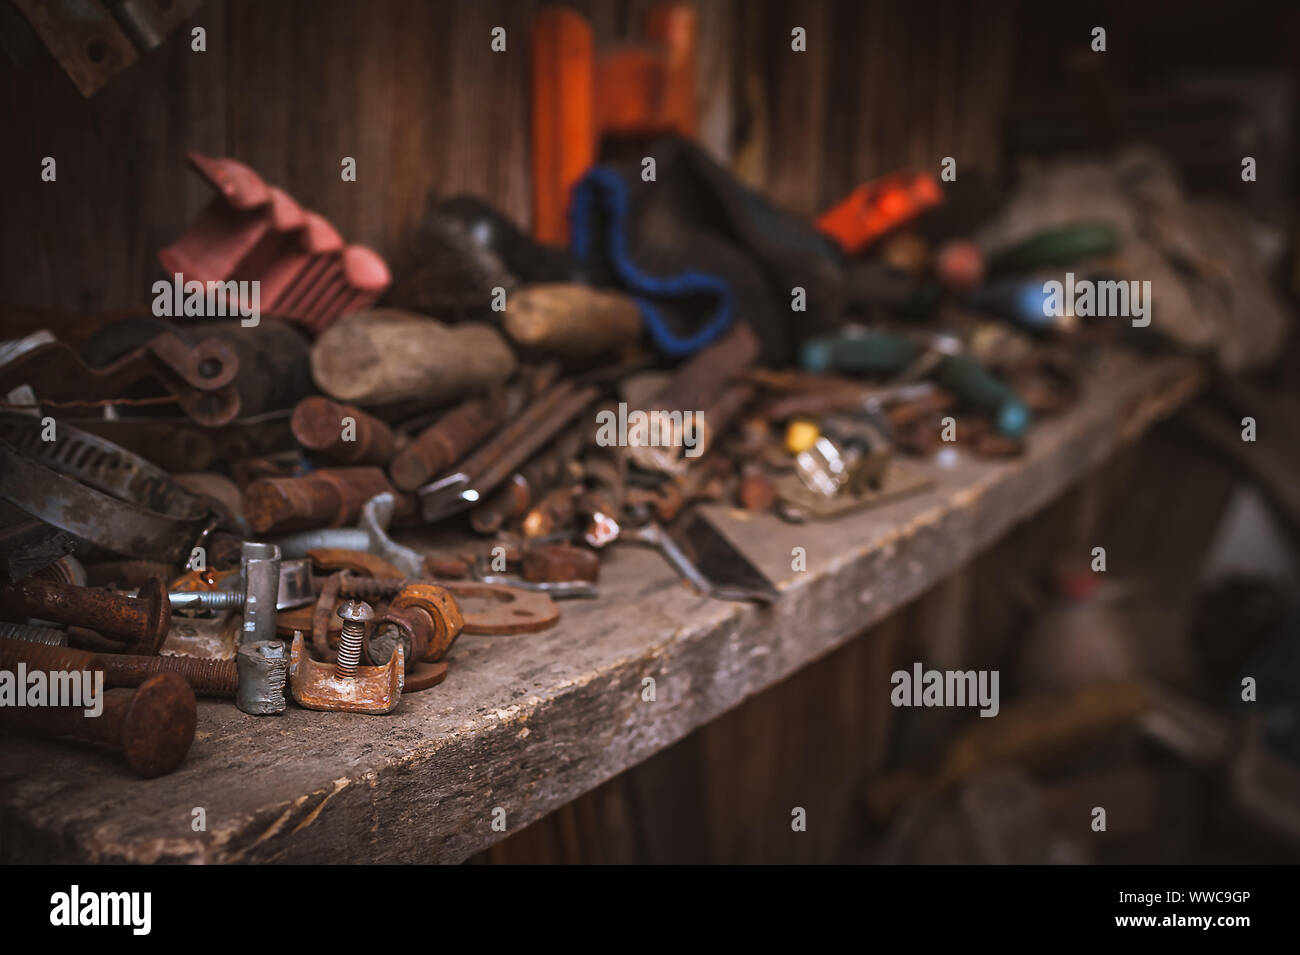 Perspective View of a Messy Wooden Shelf in a Garage Workshop. Keeping Your Workspace Clean and Tidy Concept. Stock Photo